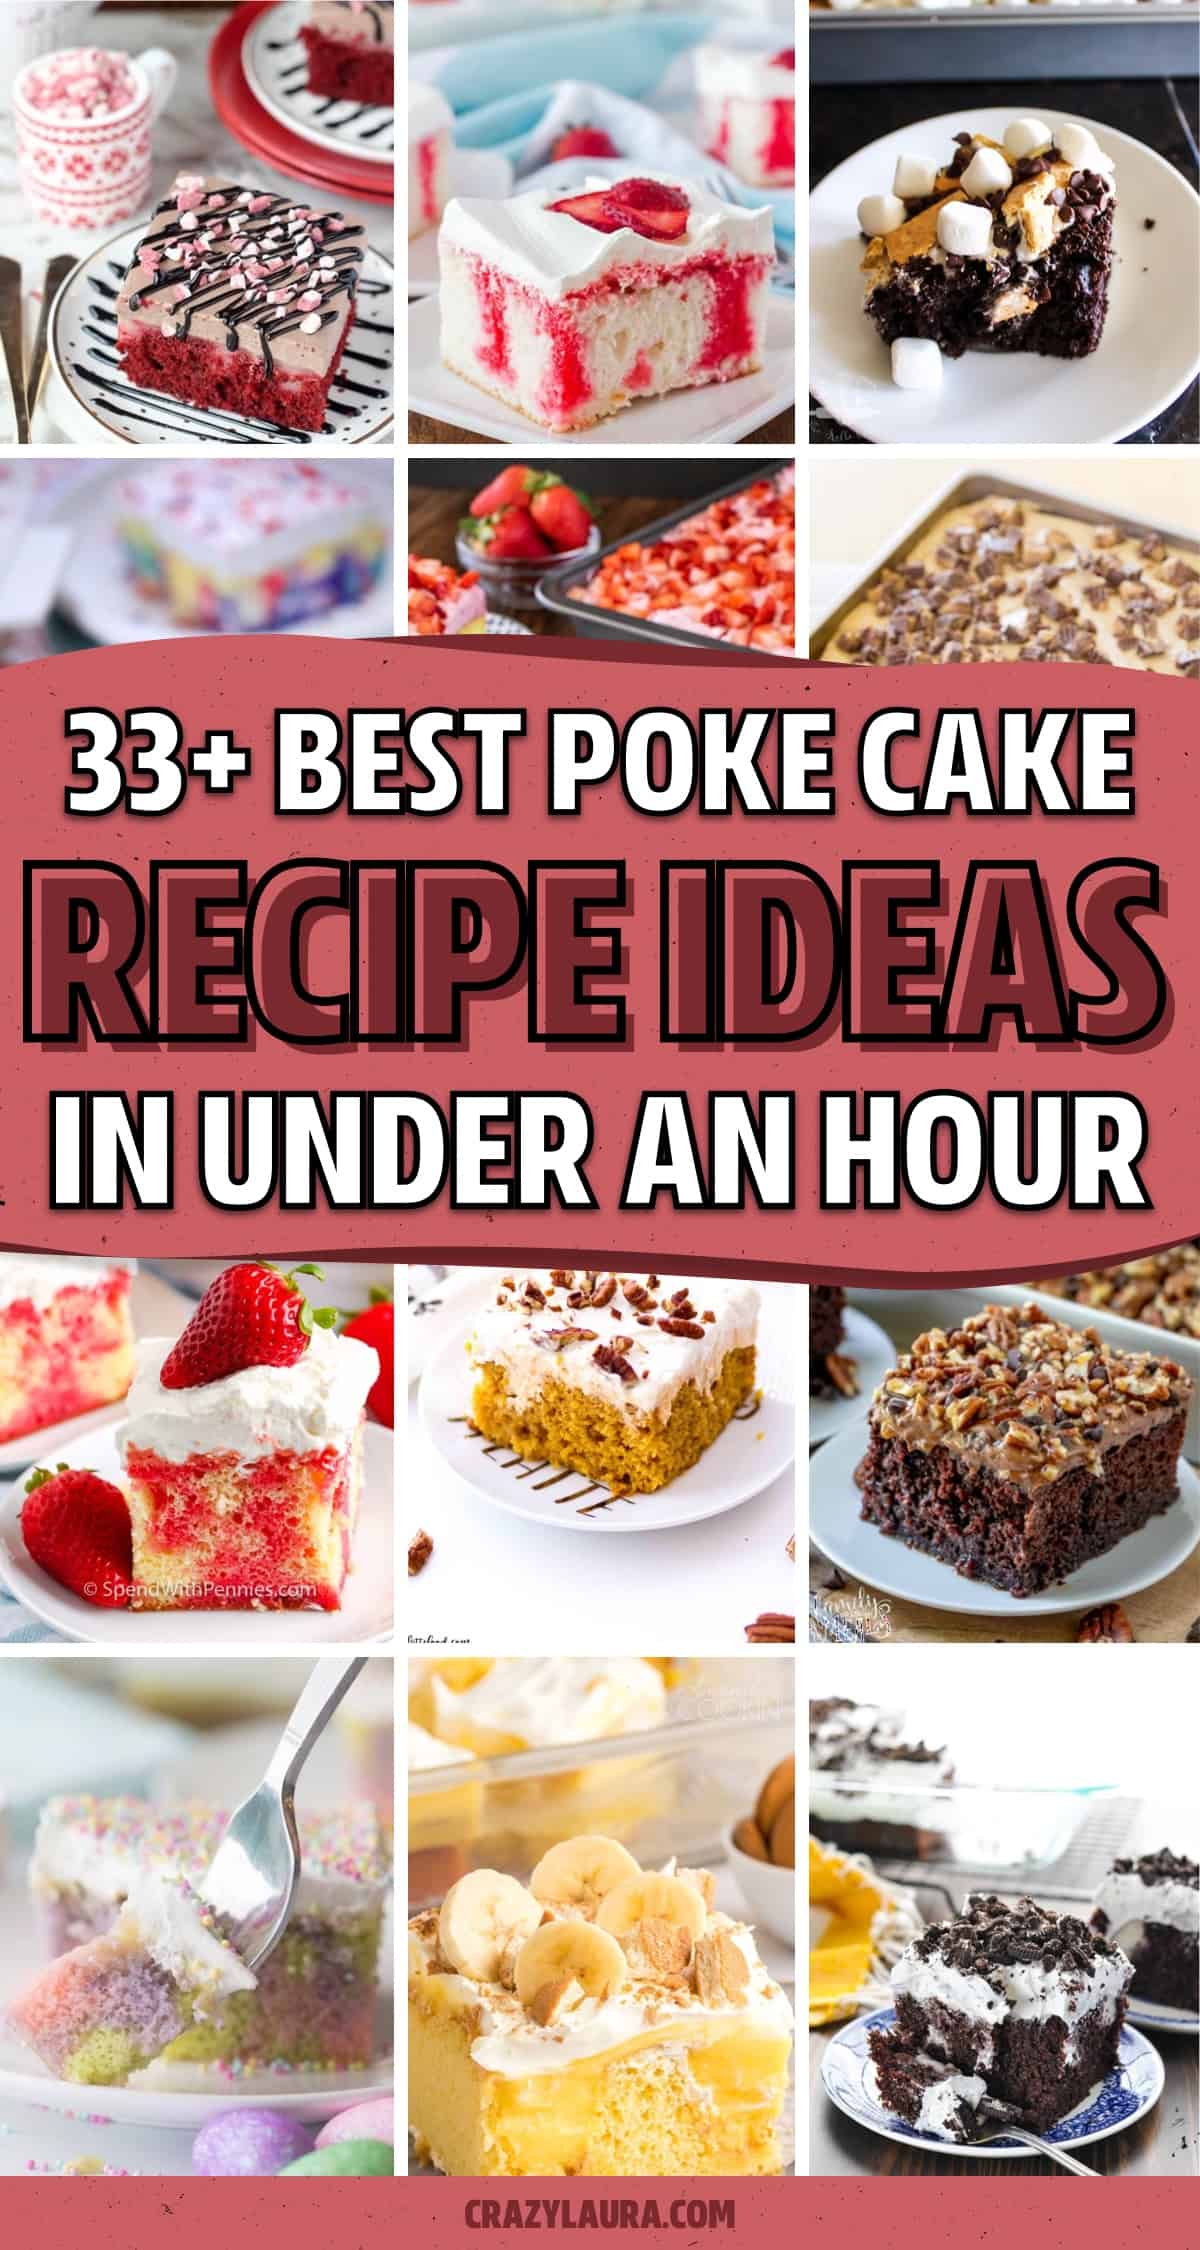 recipe ideas for fast sheet cakes